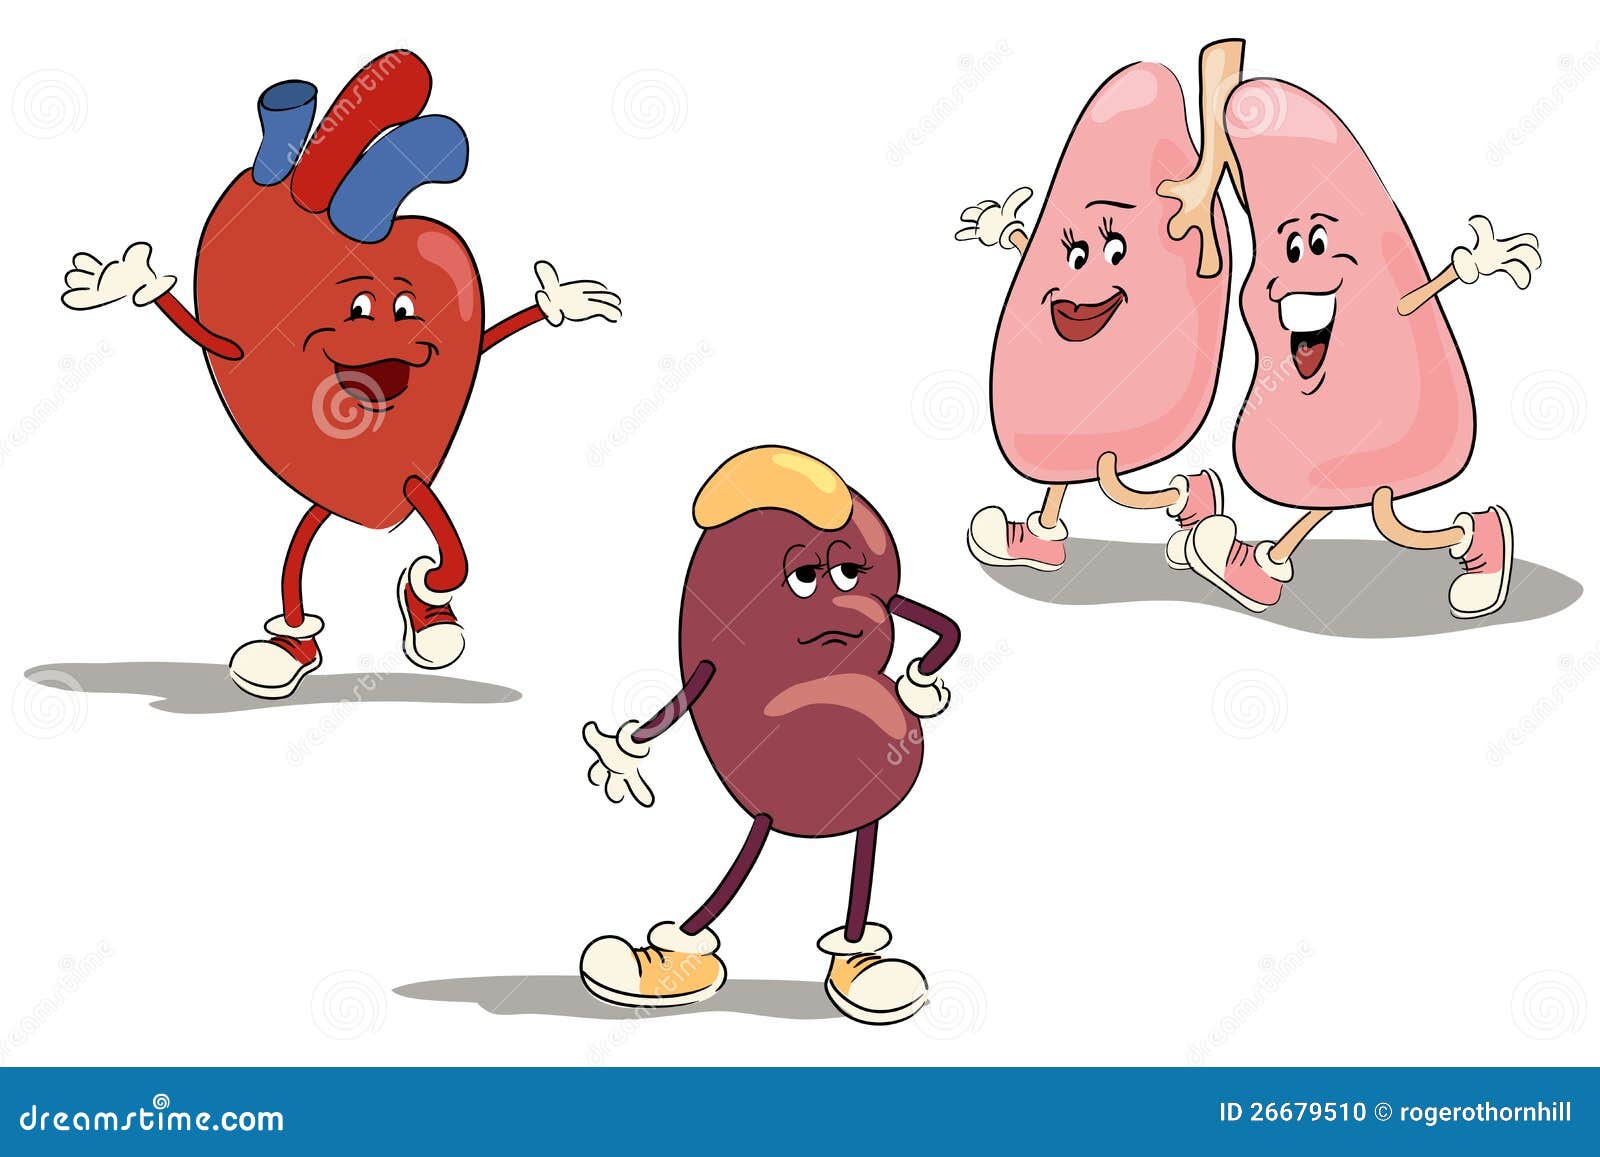 Image result for images of happy internal organs